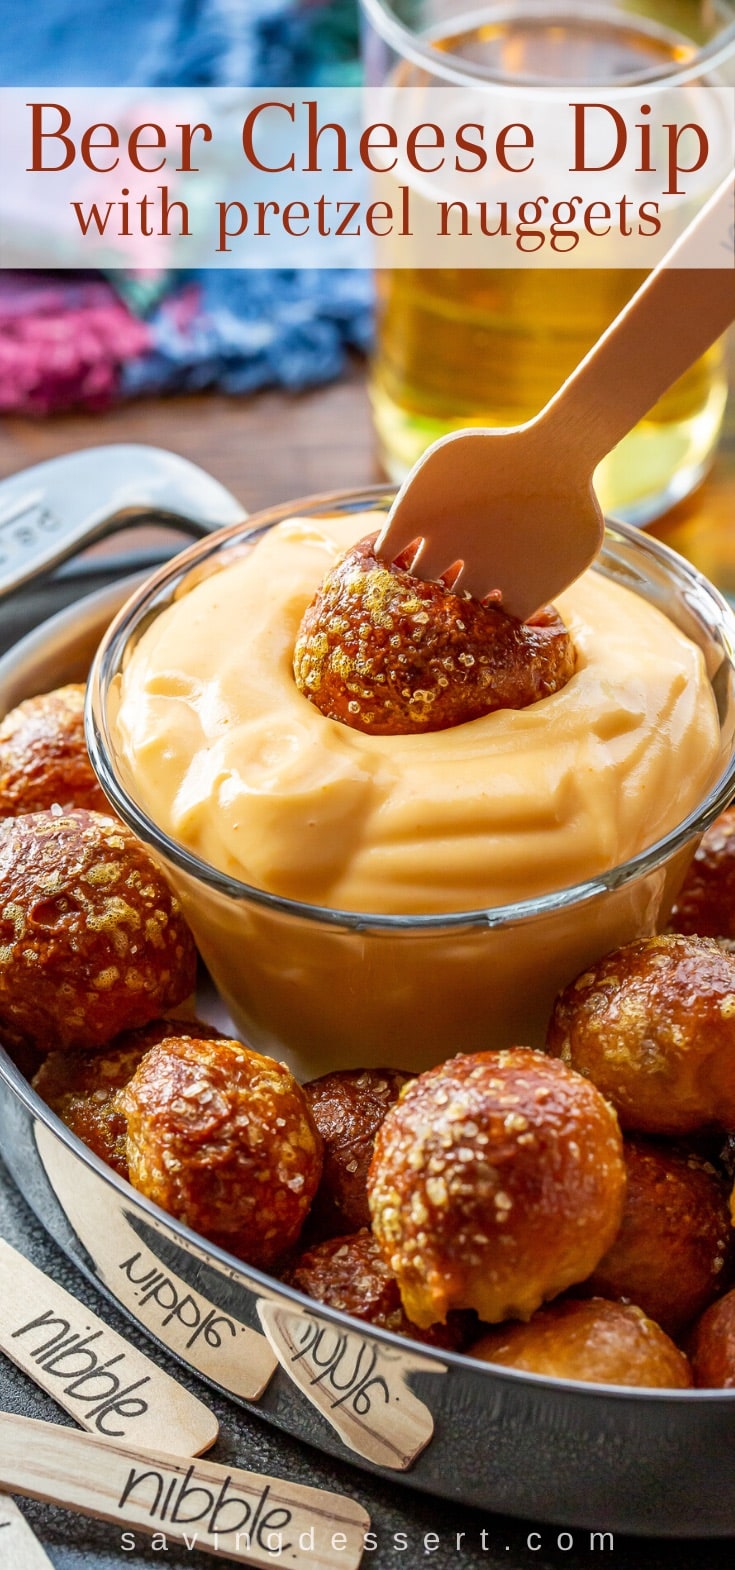 A platter of pretzel nuggets and hot beer cheese dip